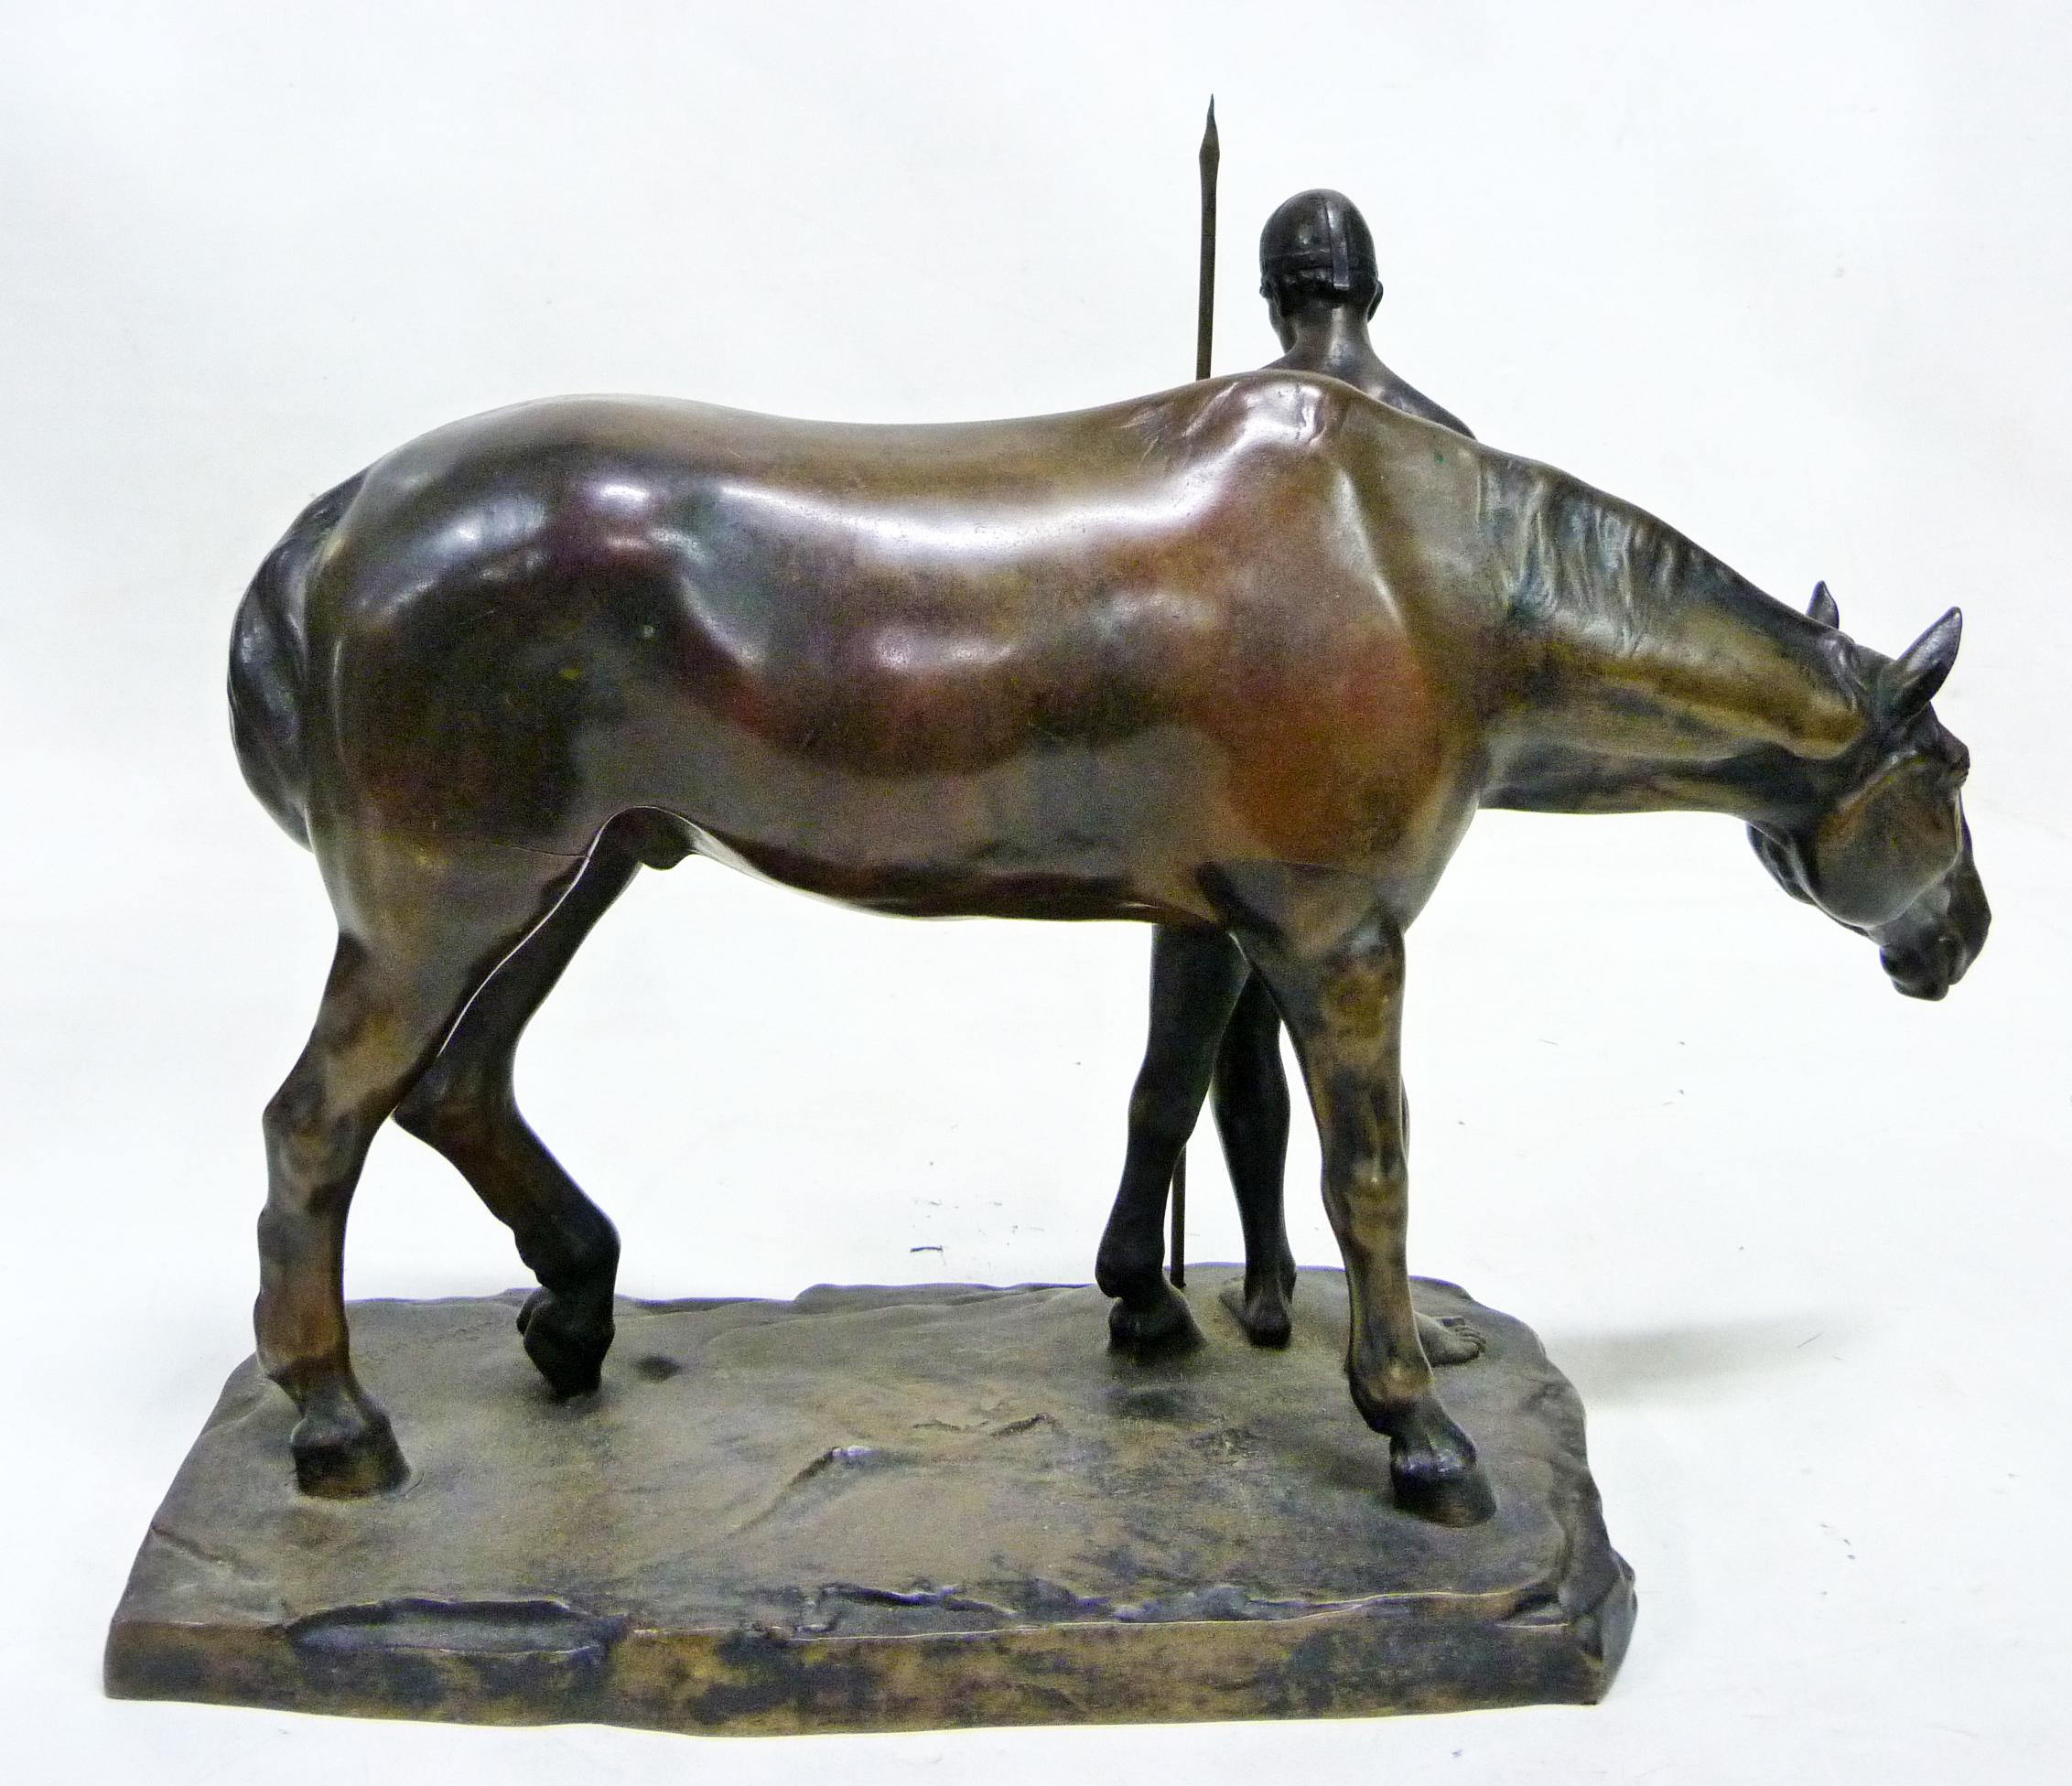 Bronze sculpture with medal patina nuanced depicting a warrior resting near his horse and holding a spear in his hand. Signed L. Vordermayer on the right base and bearing the mark of the Gladenbeck founder in Berlin.

ABOUT THE ARTIST
Ludwig